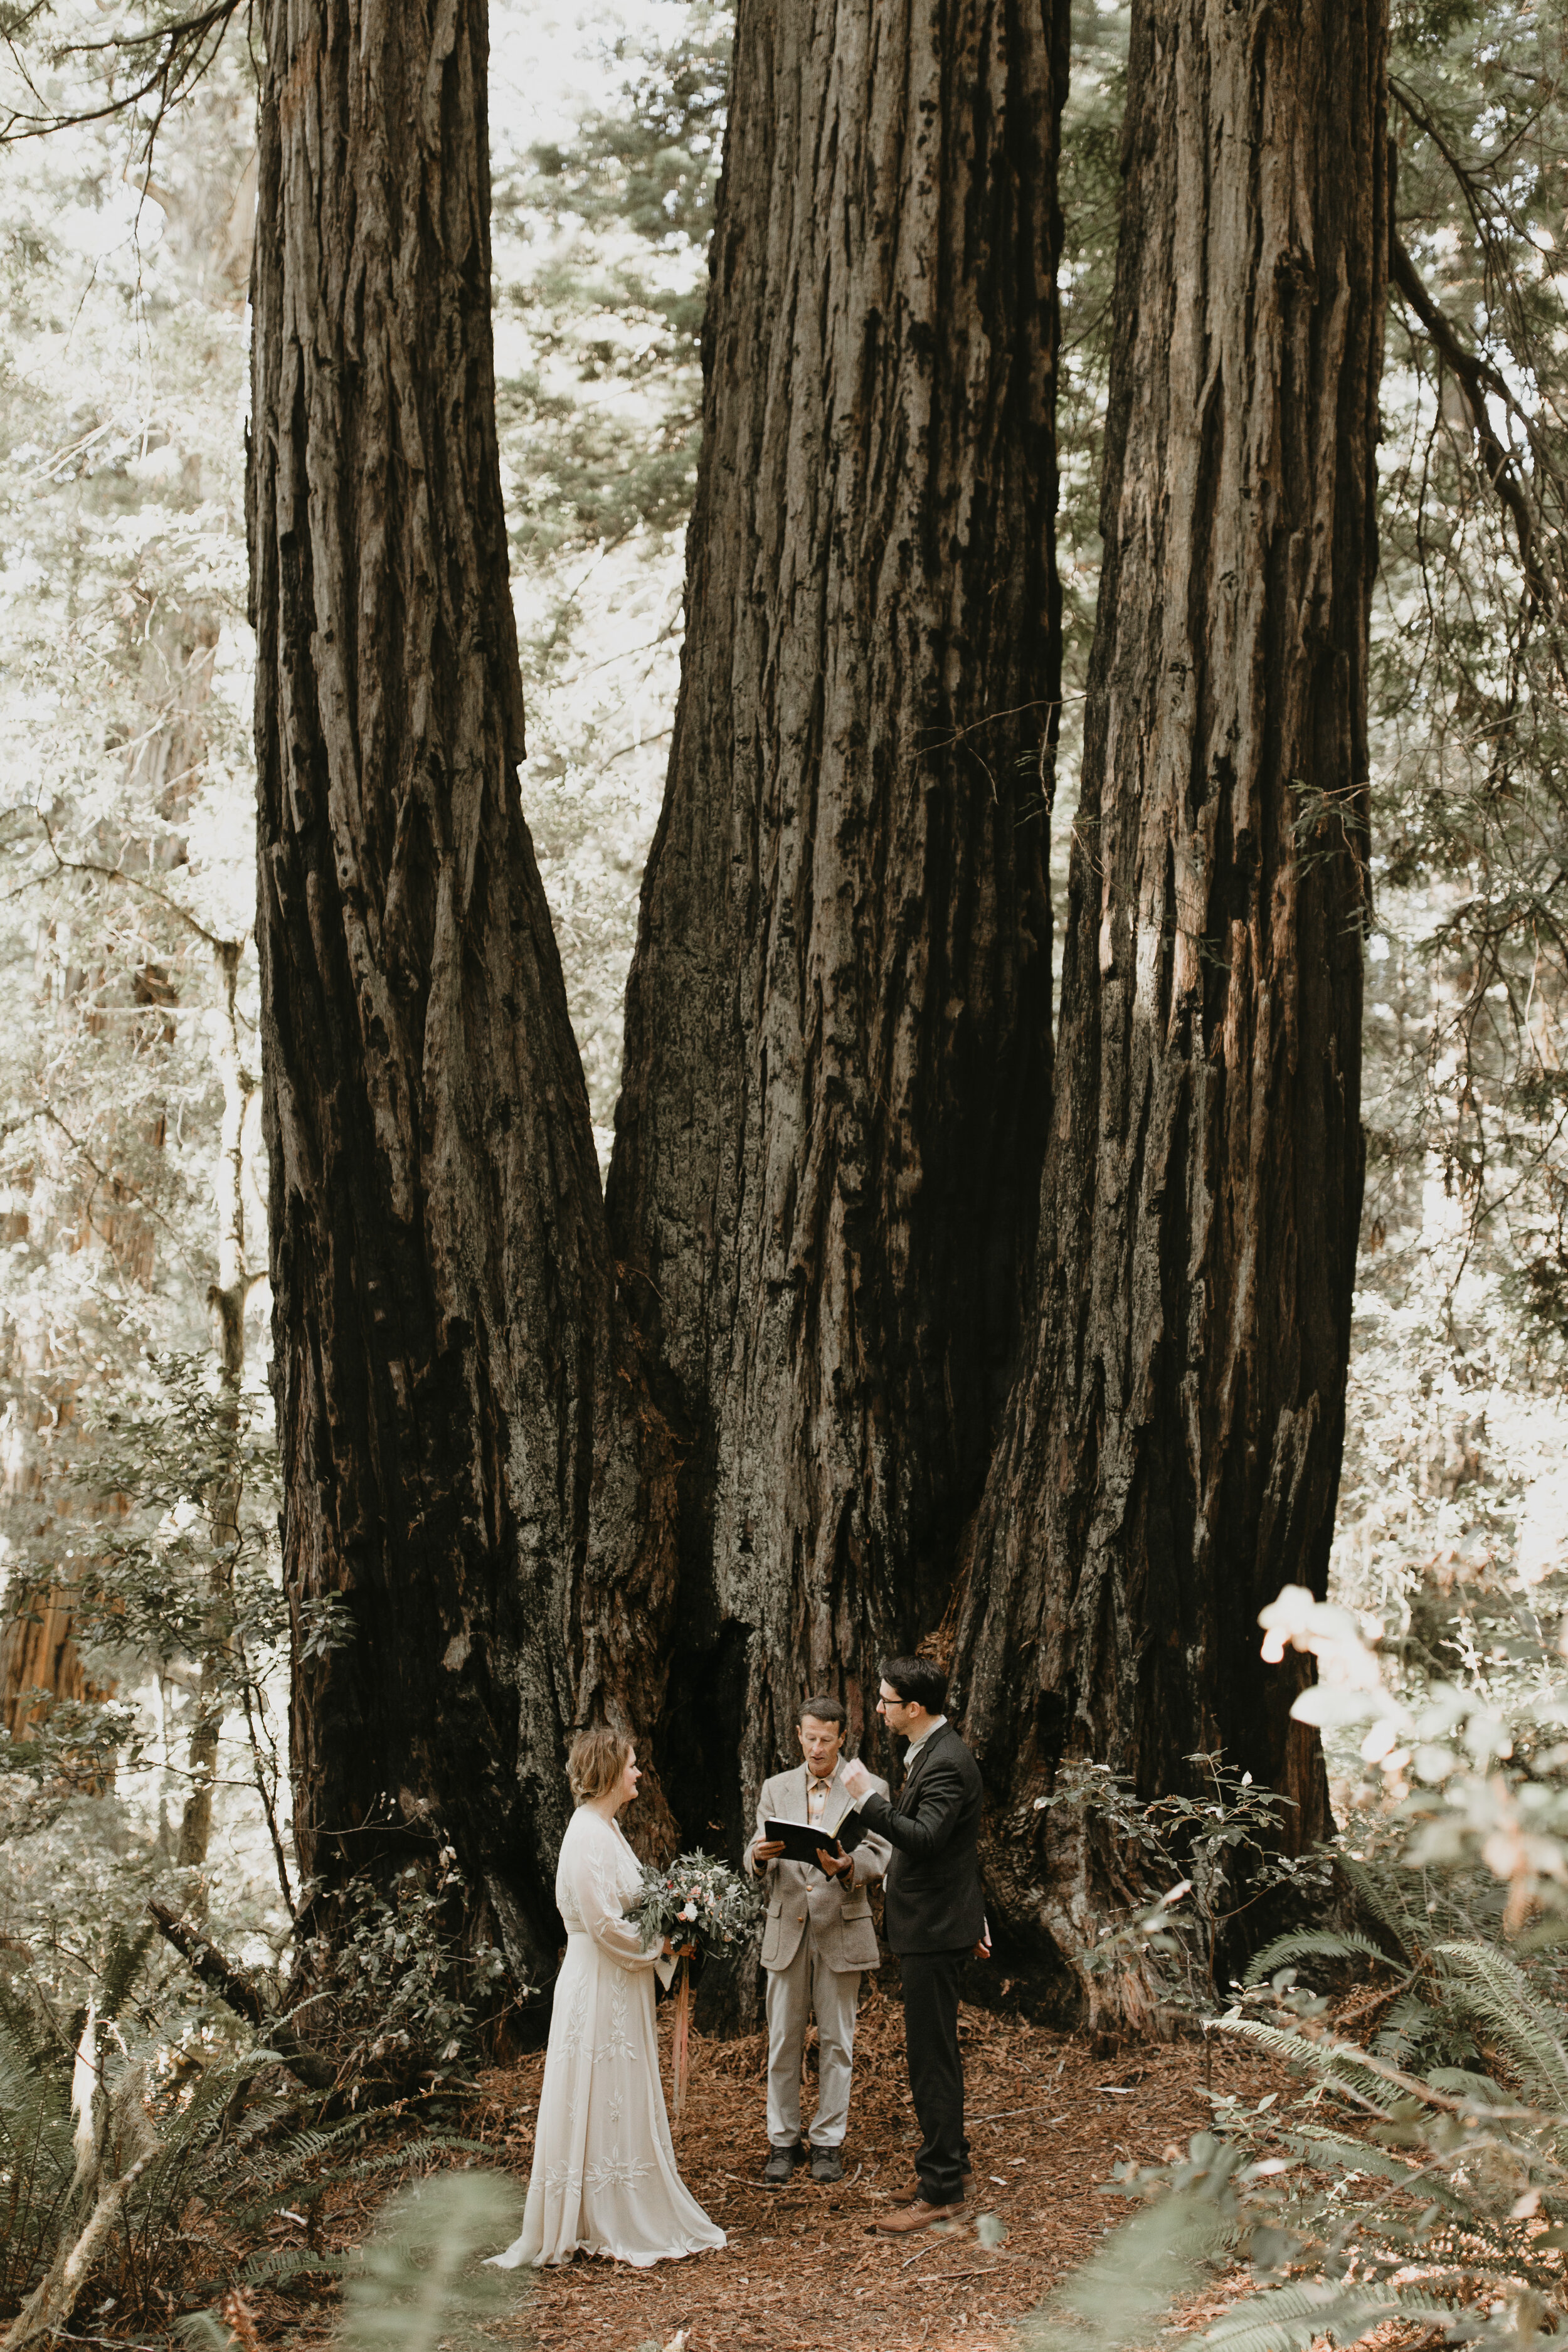 nicole-daacke-photography-redwood-forest-elopement-in-northern-california-patricks-point-coast-adventure-elopement-photography-redwoods-elopement-photographer-136.jpg